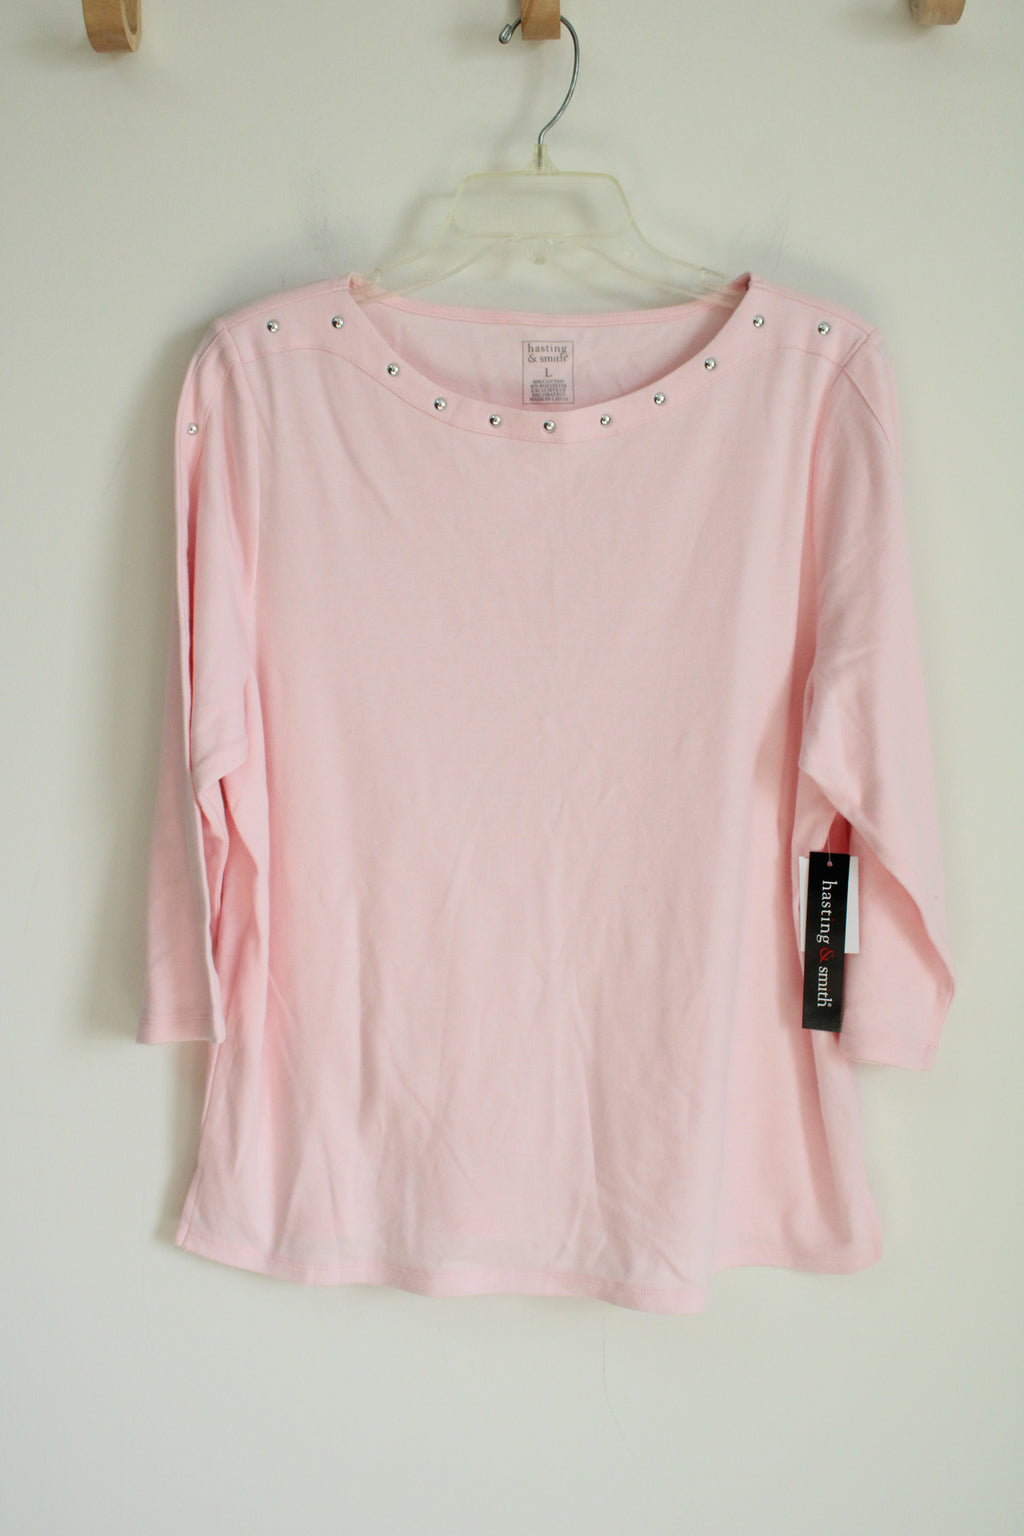 NEW Hasting & Smith Light Pink Long Sleeved Shirt | L